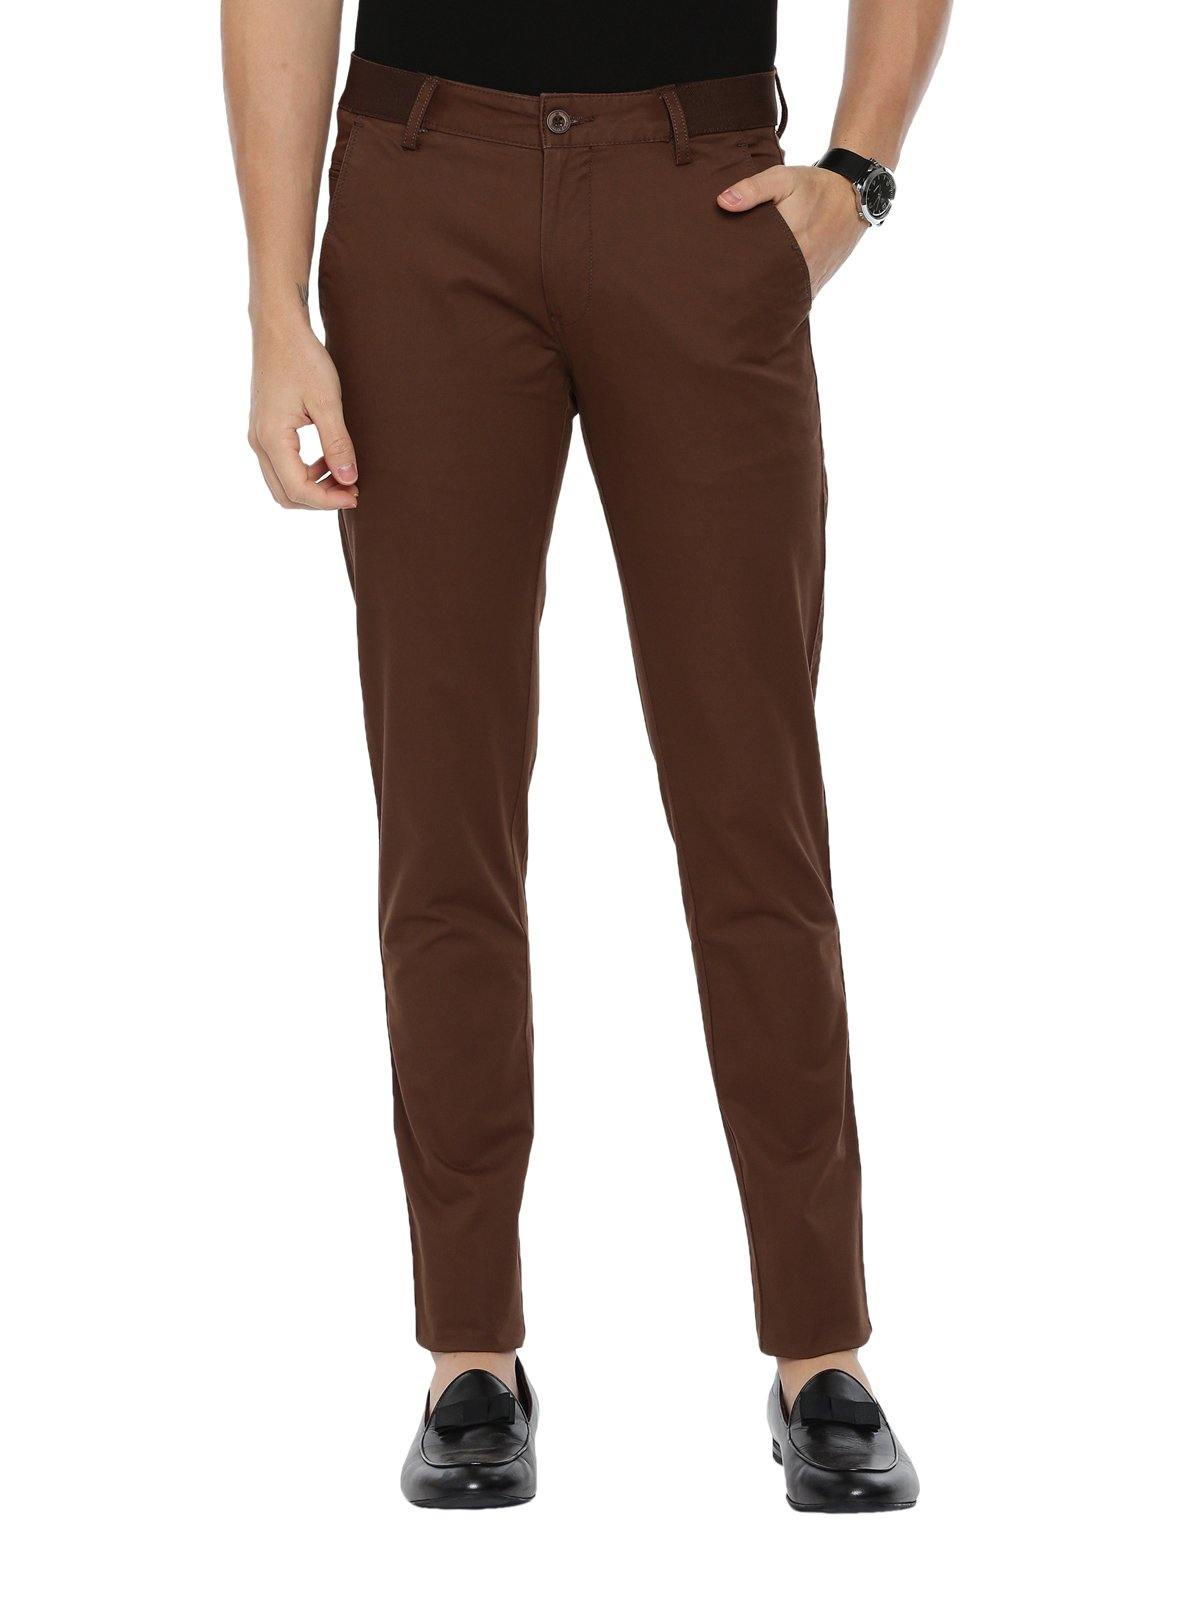 Buy Brown Color Ankle Length Fusion Cotton Pant Online | Tistabene -  Tistabene